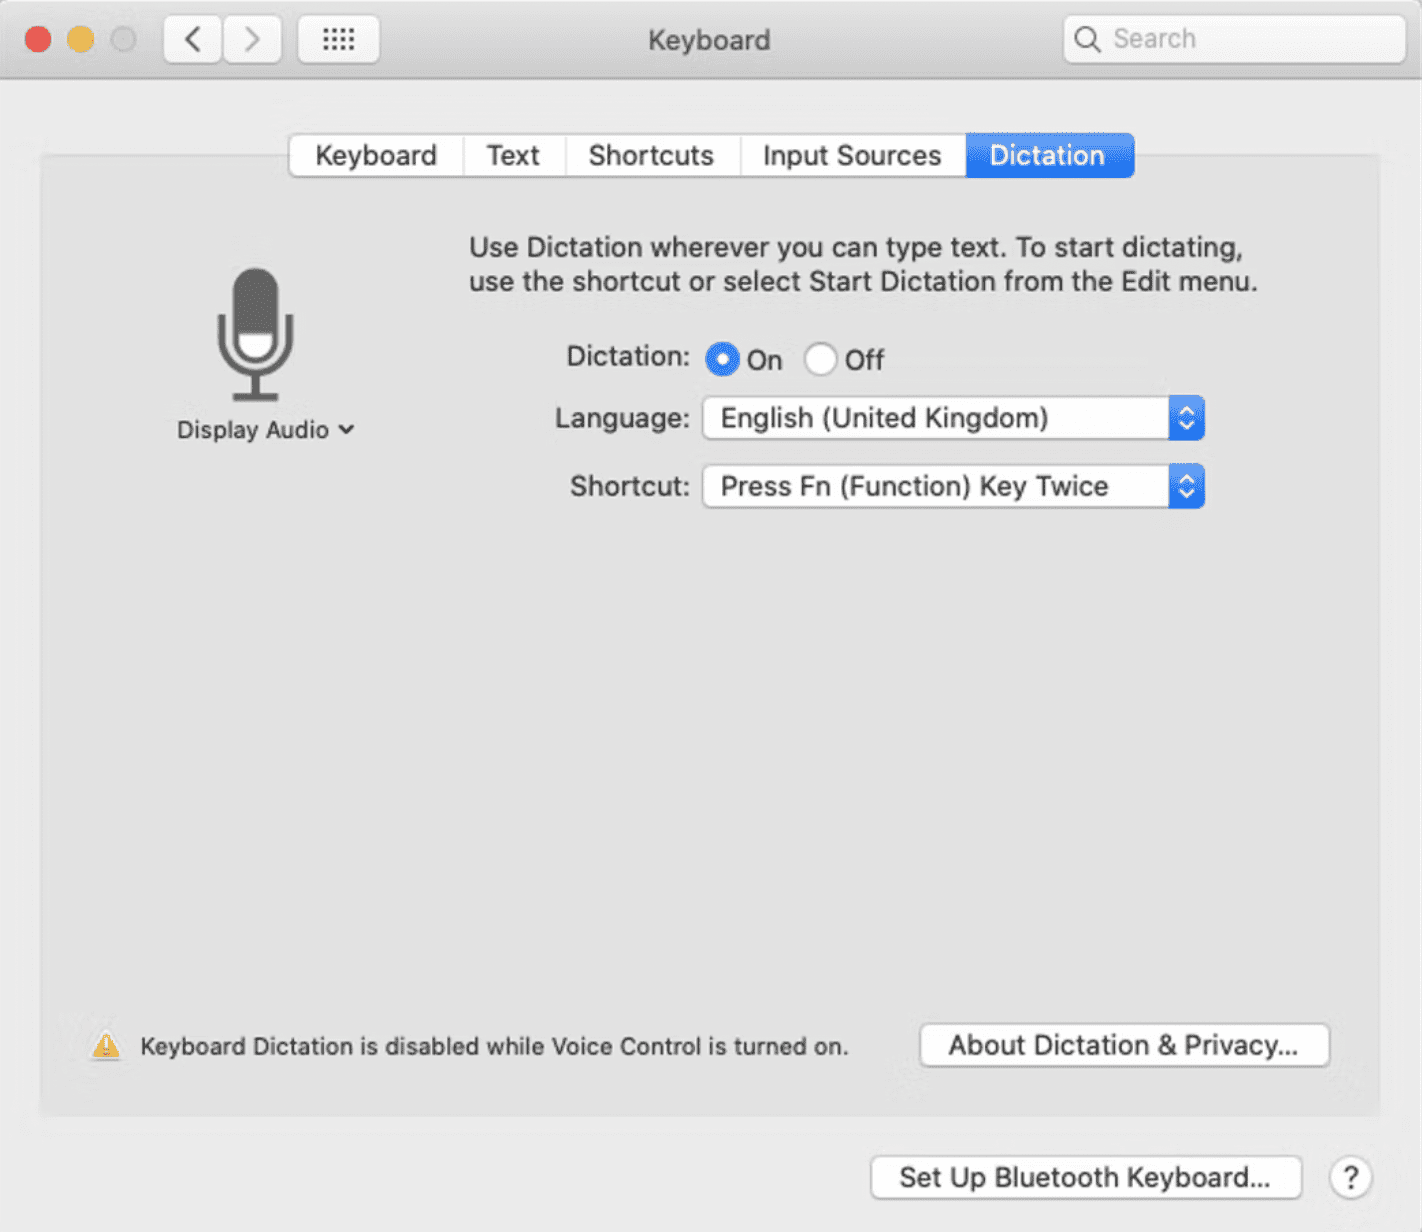 Keyboard Dictation is disabled while Voice Control is turned on